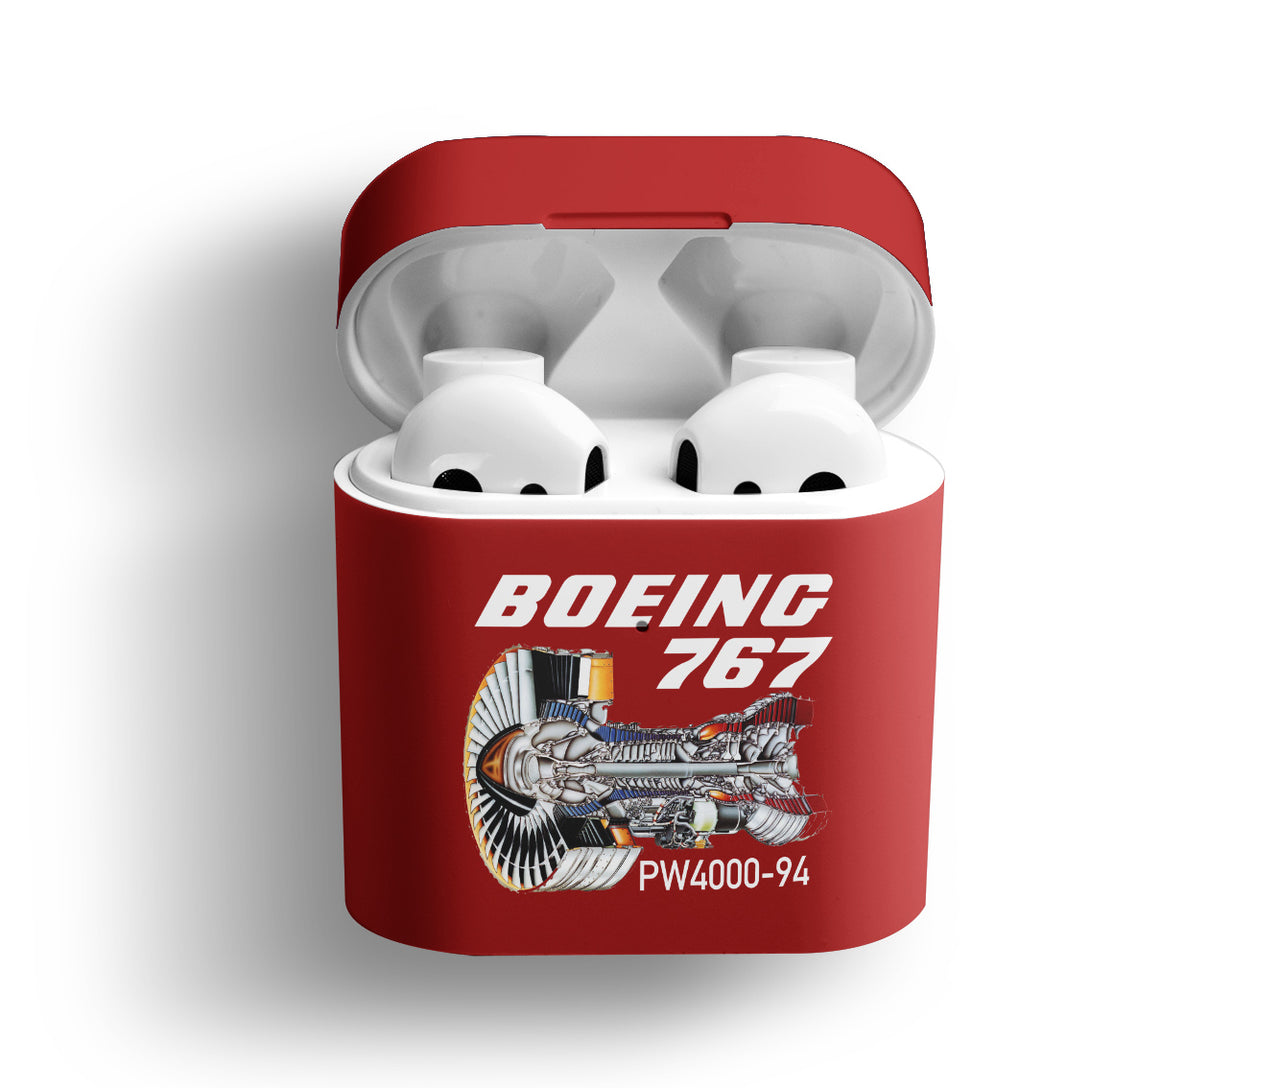 Boeing 767 Engine (PW4000-94) Designed AirPods  Cases